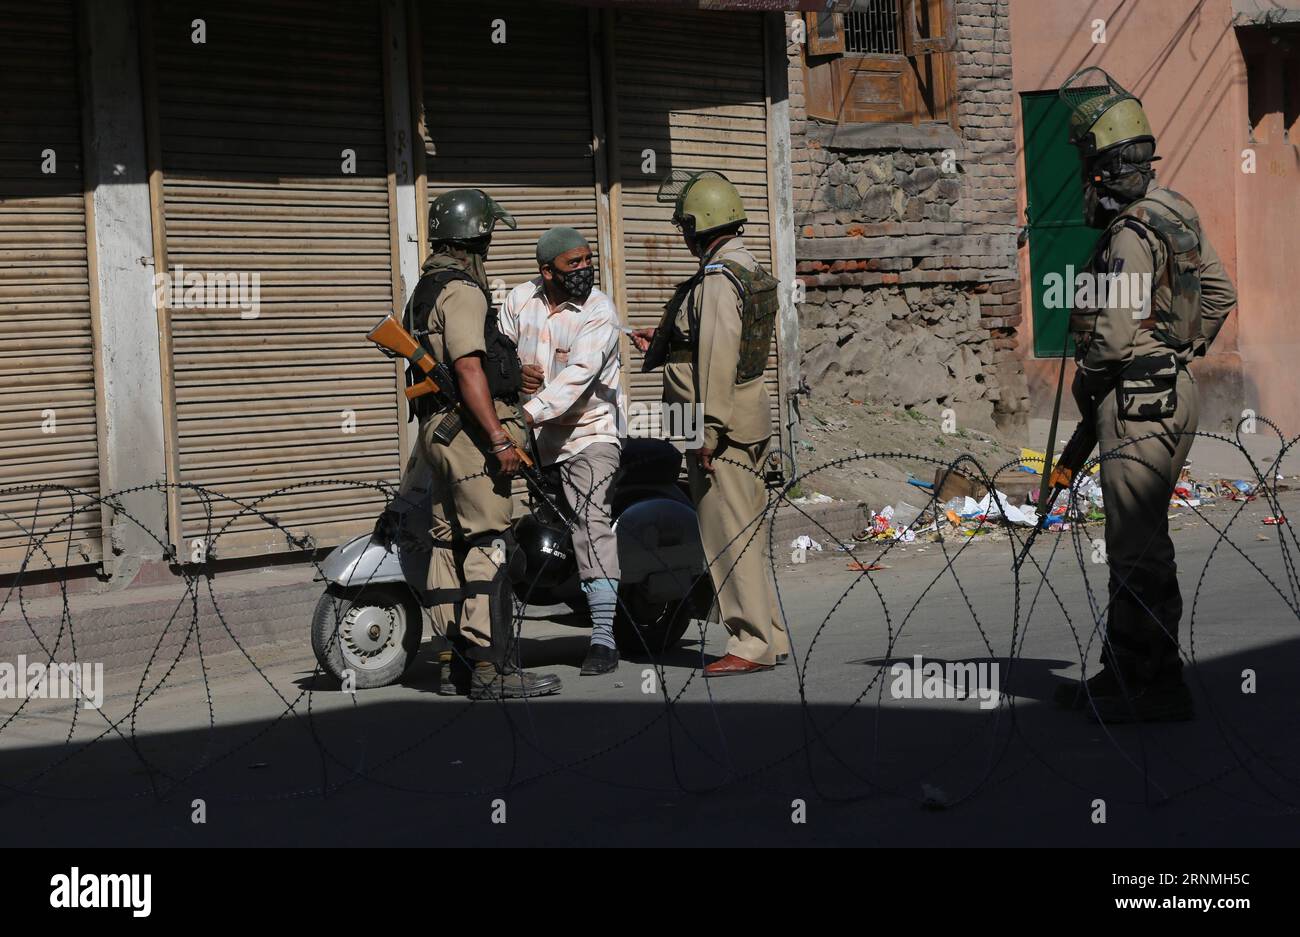 (170529) -- SRINAGAR, May 29, 2017 -- An Indian paramilitary trooper checks the identity card of a man during curfew-like restrictions in downtown Srinagar, summer capital of Indian-controlled Kashmir, May 29, 2017. Curfew-like restrictions have been imposed in several areas of Srinagar to prevent protests and clashes. ) (zcc) KASHMIR-SRINAGAR-RESTRICTIONS JavedxDar PUBLICATIONxNOTxINxCHN   Srinagar May 29 2017 to Indian paramilitary Trooper Checks The Identity Card of a Man during Curfew Like Restrictions in Downtown Srinagar Summer Capital of Indian Controlled Kashmir May 29 2017 Curfew Like Stock Photo